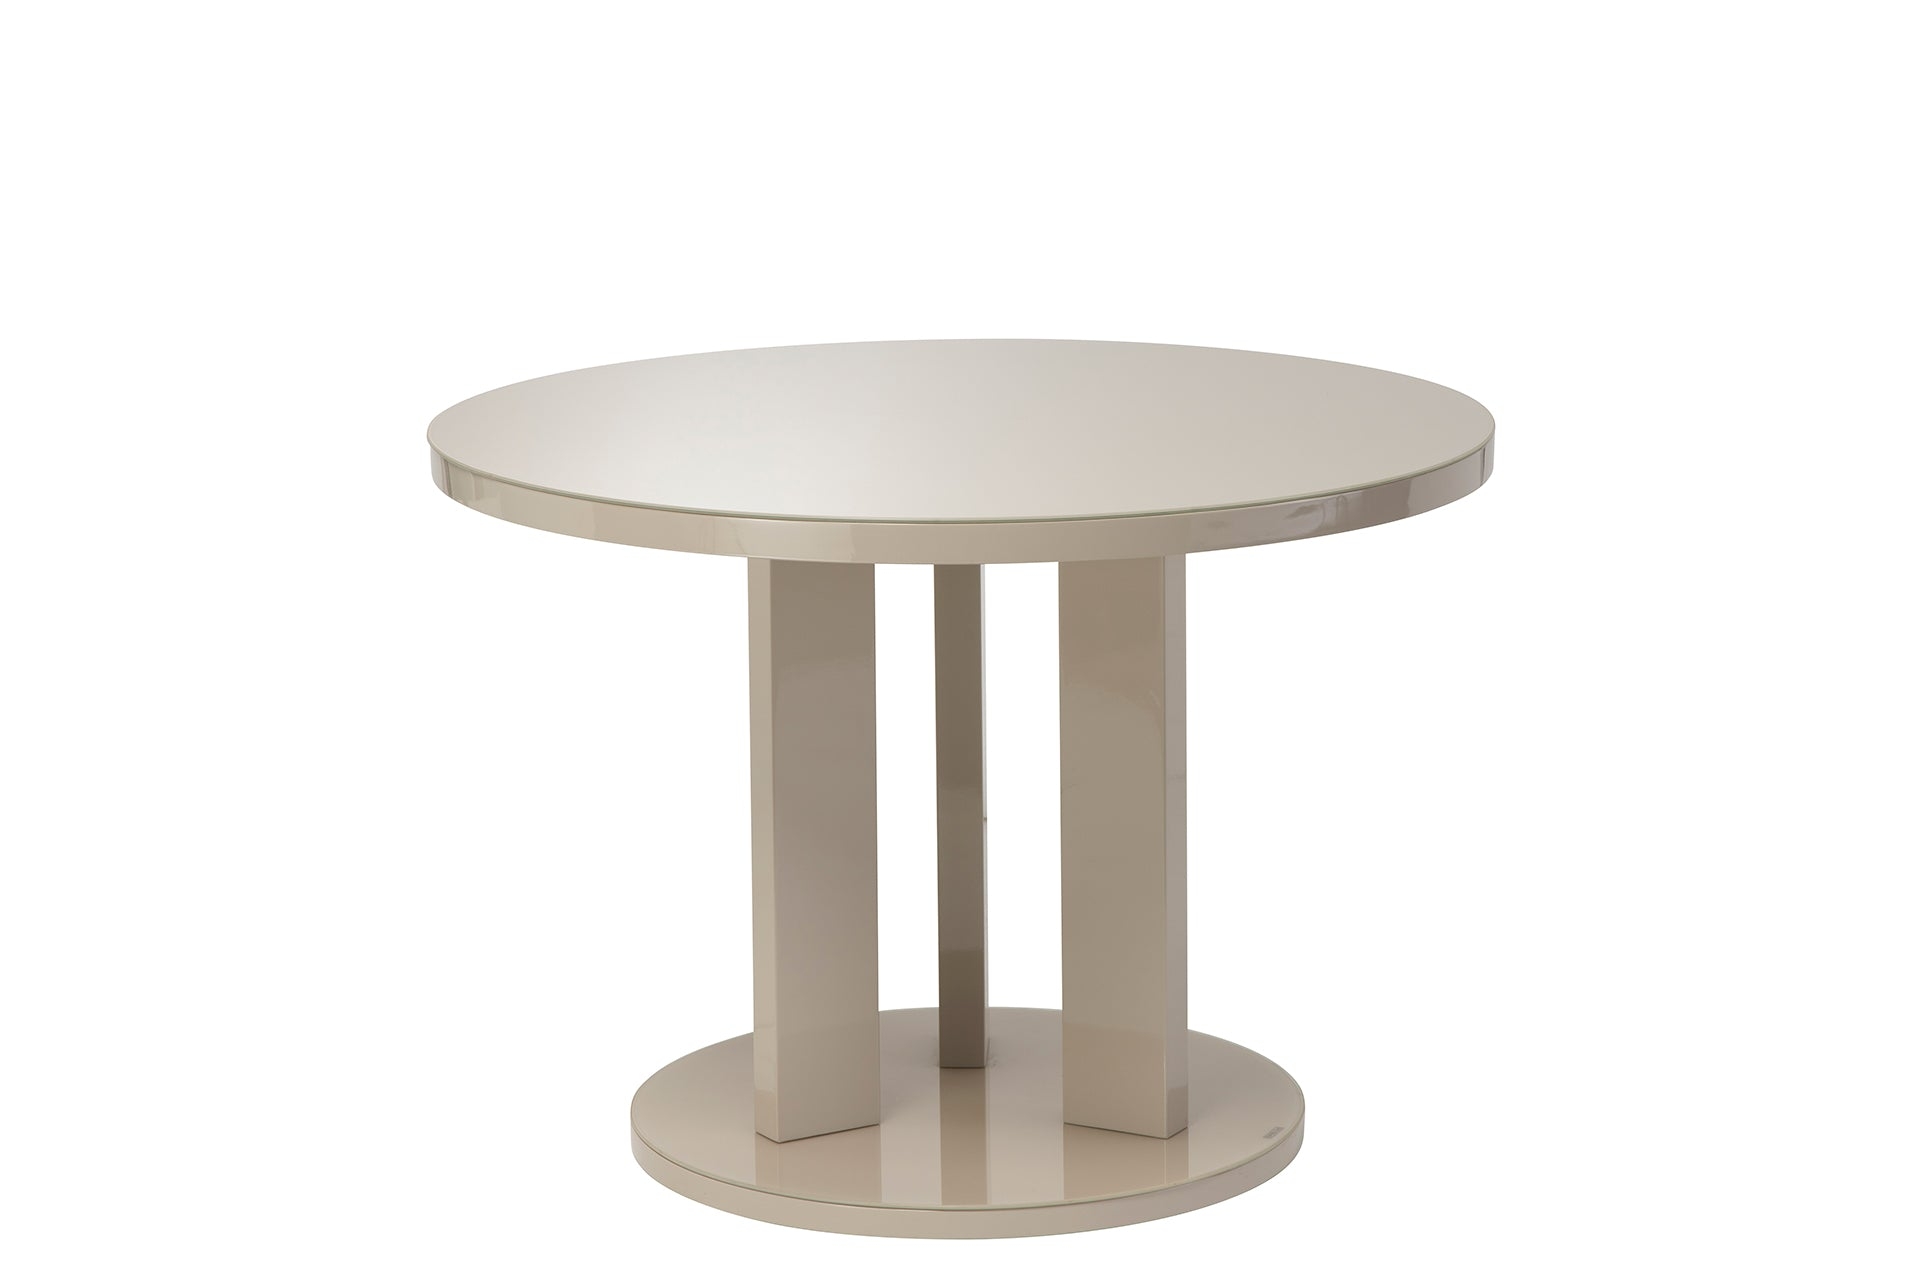 Elsie Round Gloss And Glass Dining Table – Latte – Lc Living